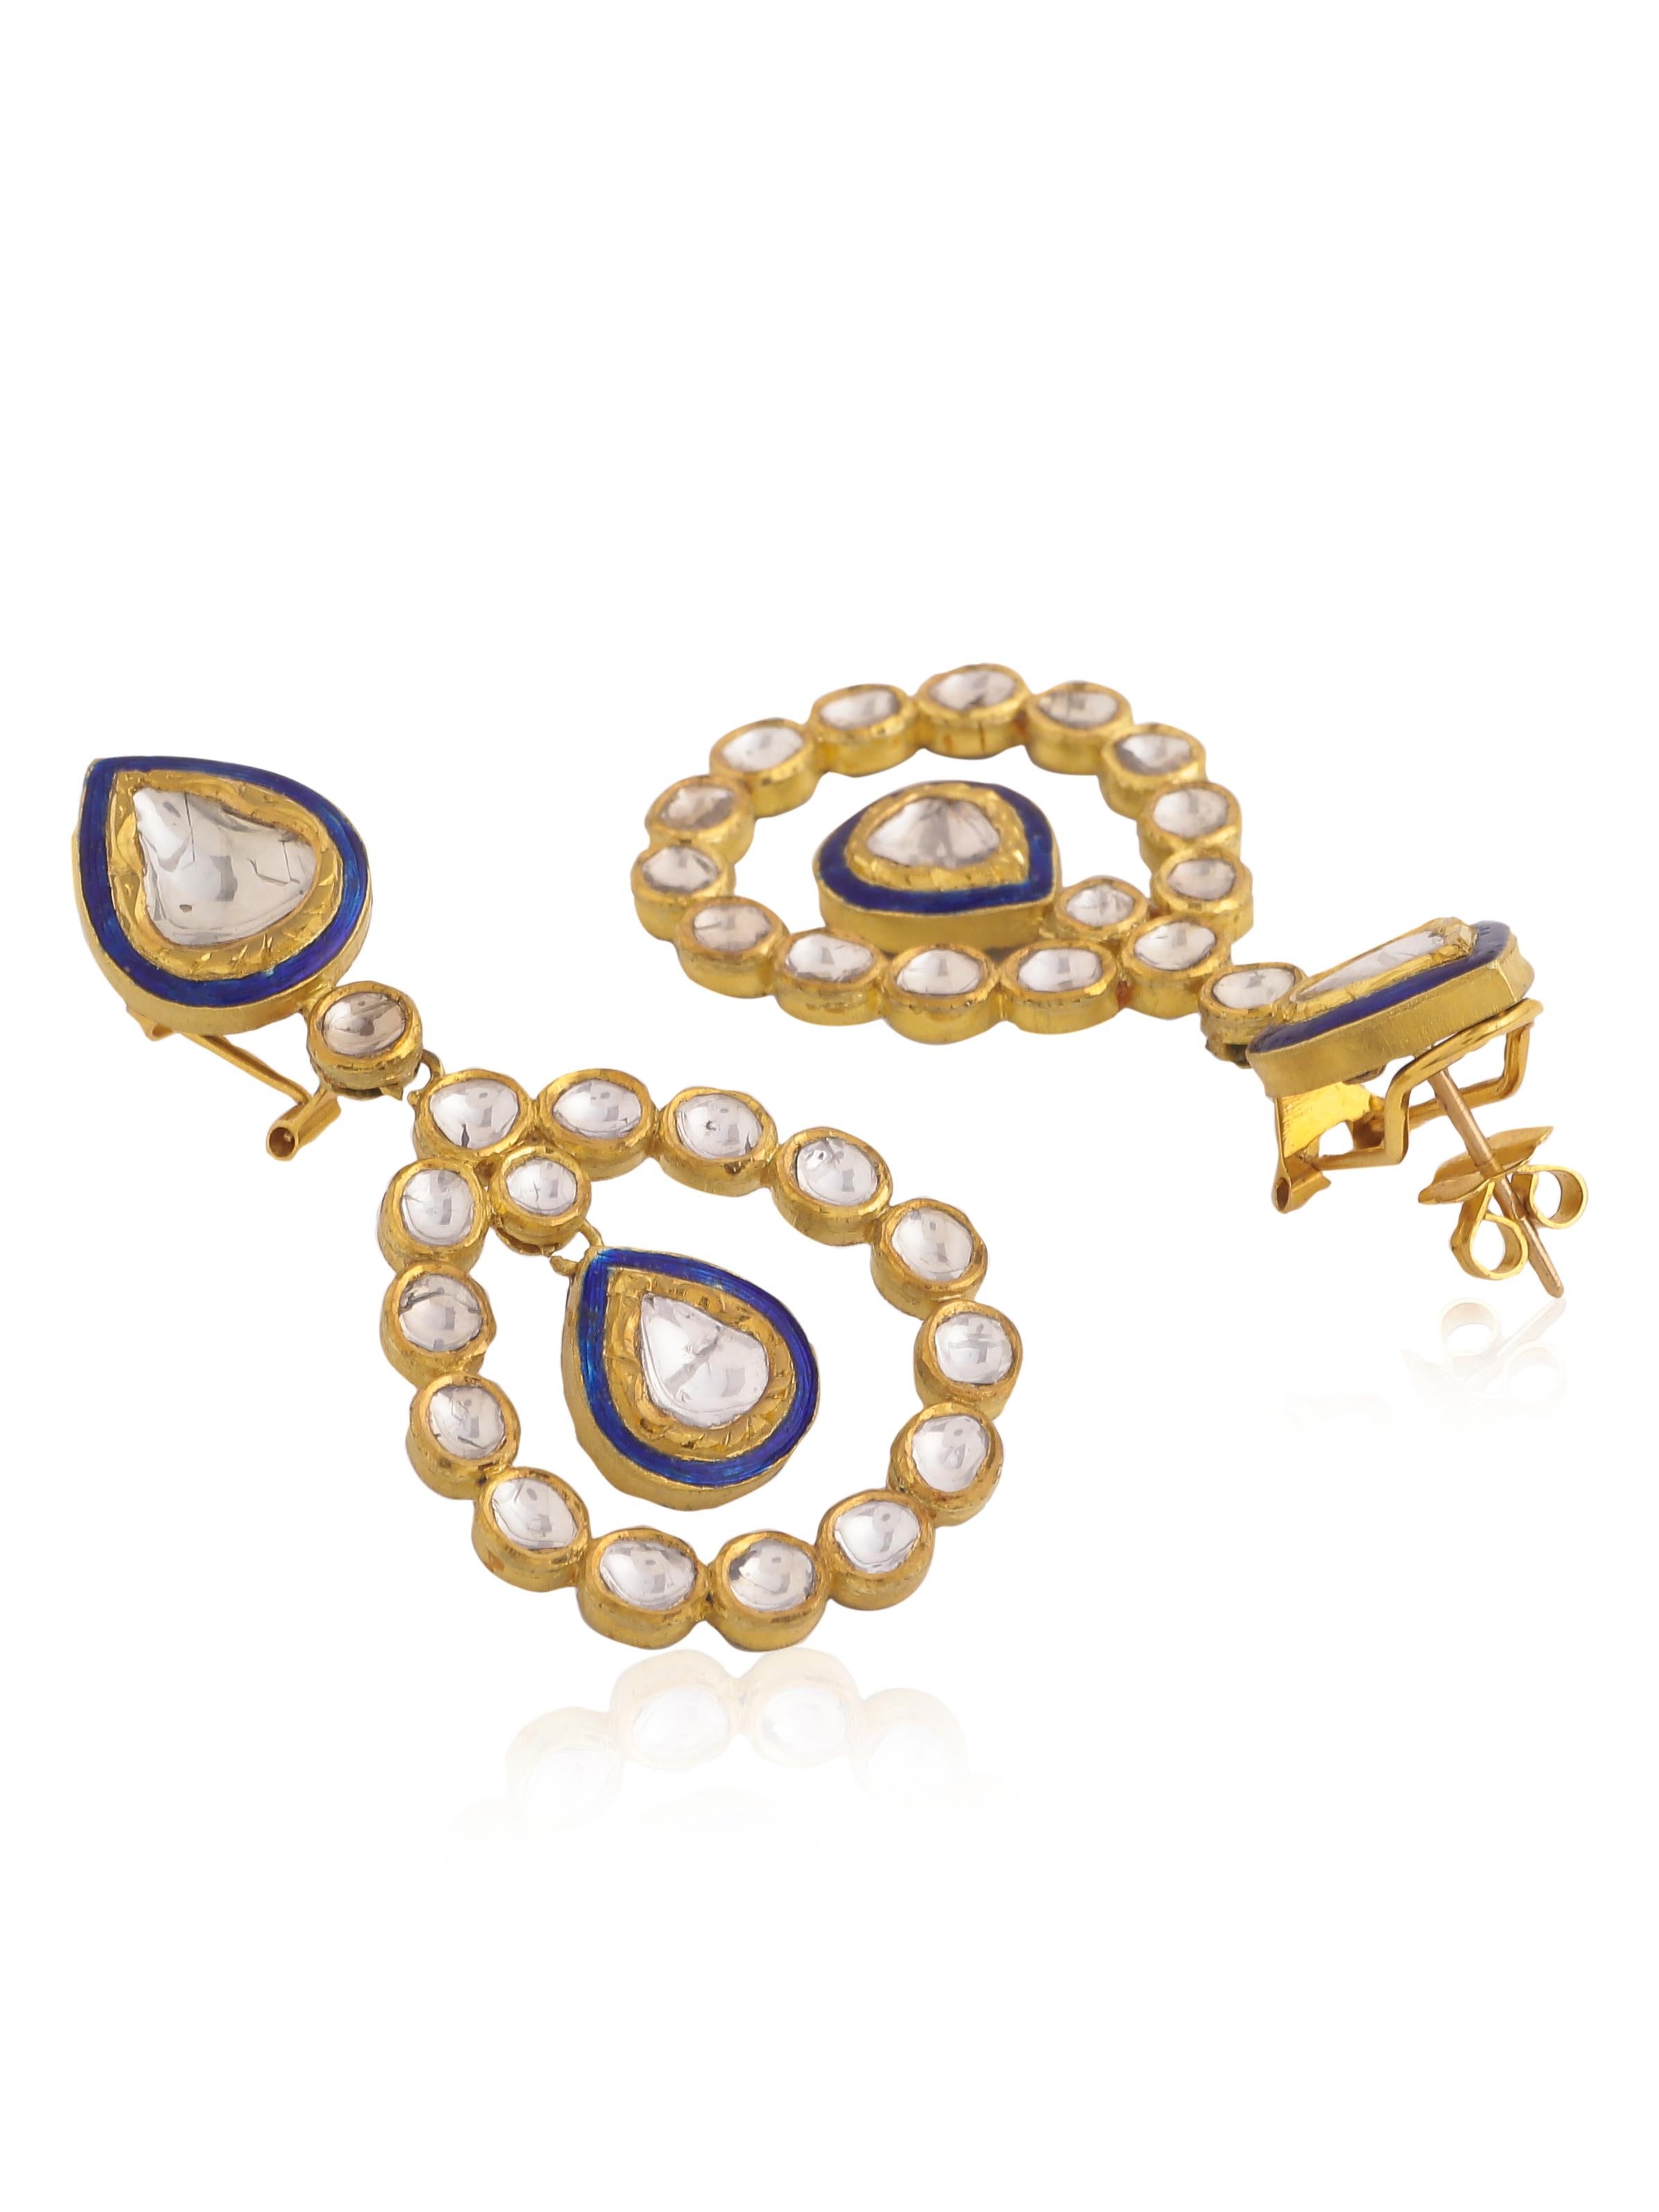 Uncut Diamond Mughal Earring with Blue Enamel Handcrafted in 18K Gold